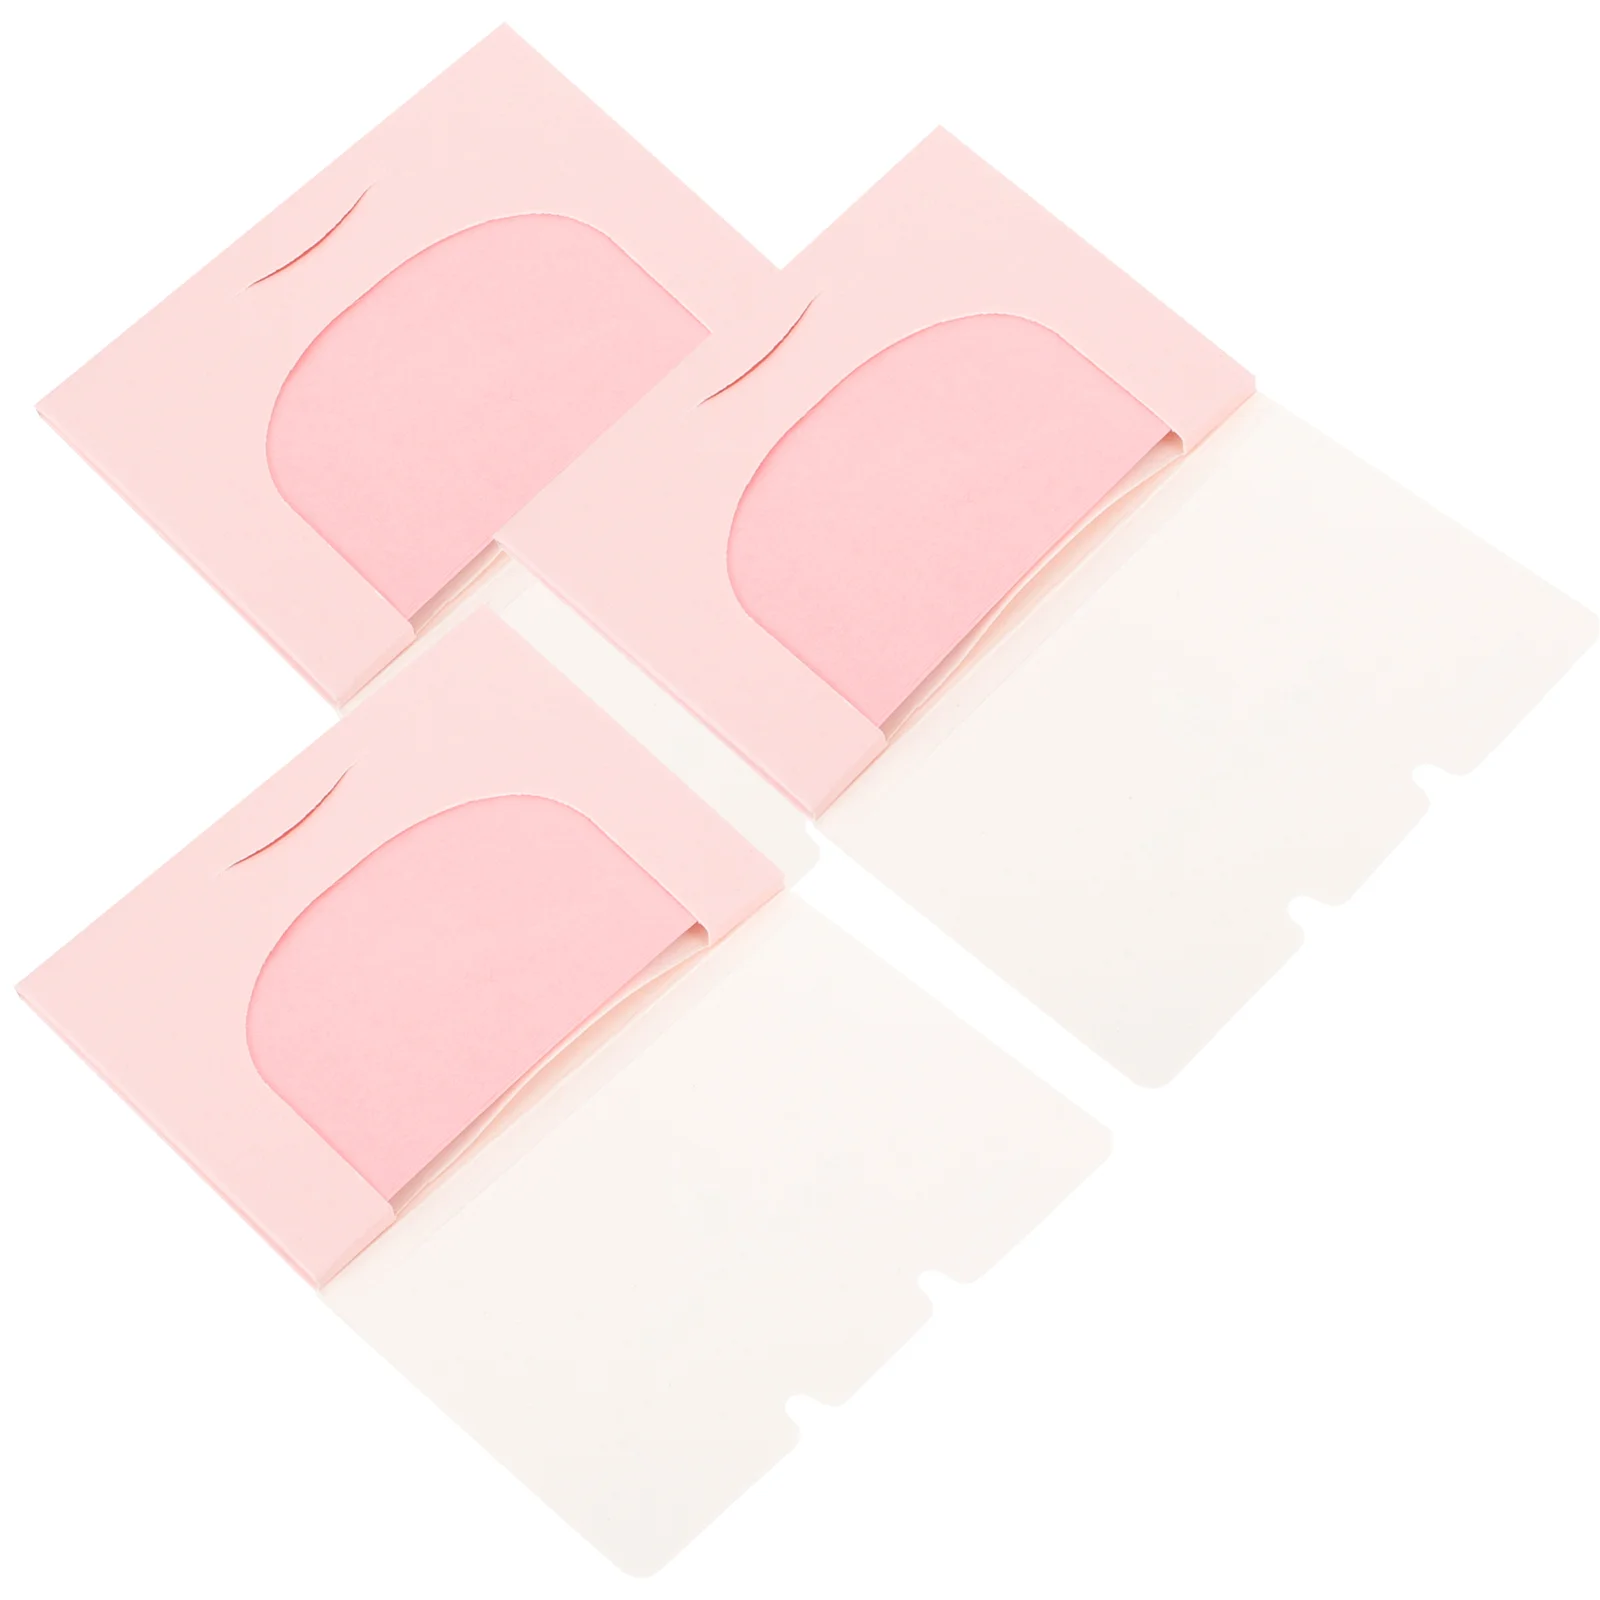 

300pcs Oil Blotting Sheets Oil Absorbent Paper Facial Sucking Oil Tissues Face Oil Control Paper (Aloe Fragrance 3 Boxes)